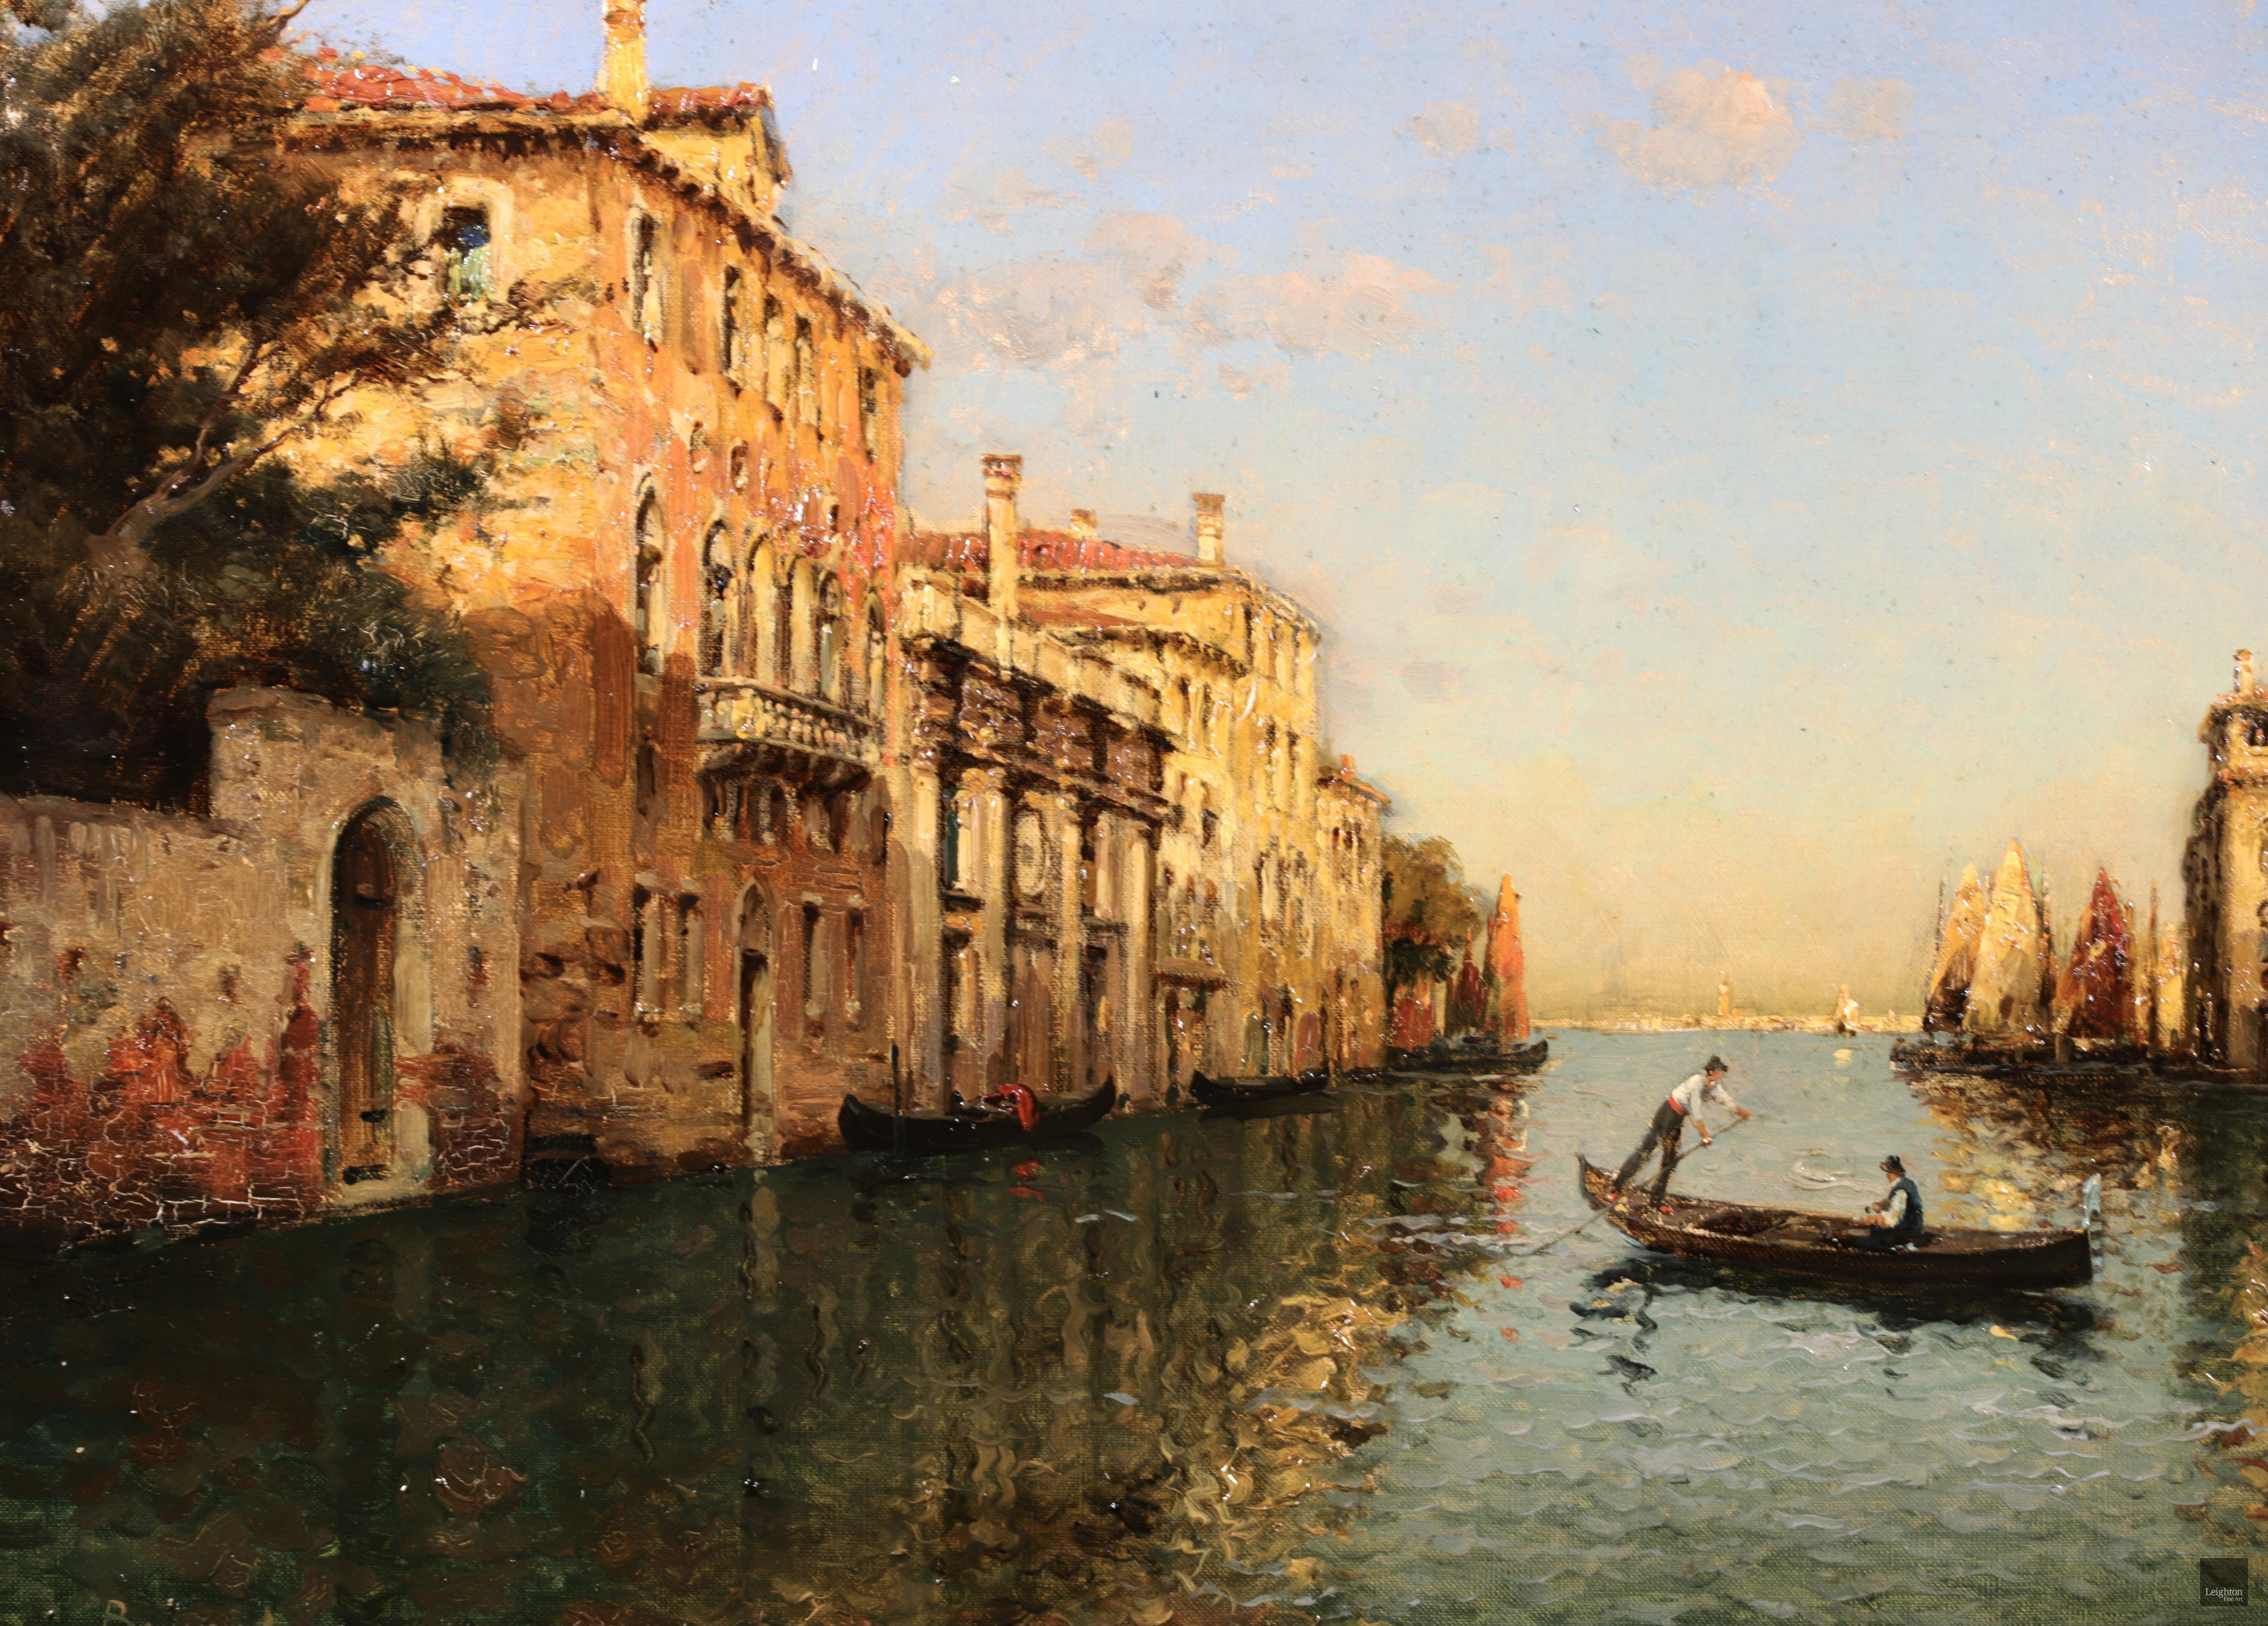 Signed impressionist figures in landscape oil circa 1910 by French painter Antoine Bouvard Snr. The work depicts a gondola with two figures inside on the river on the canal at the port of Venice. The sun is setting and illuminating the buildings on